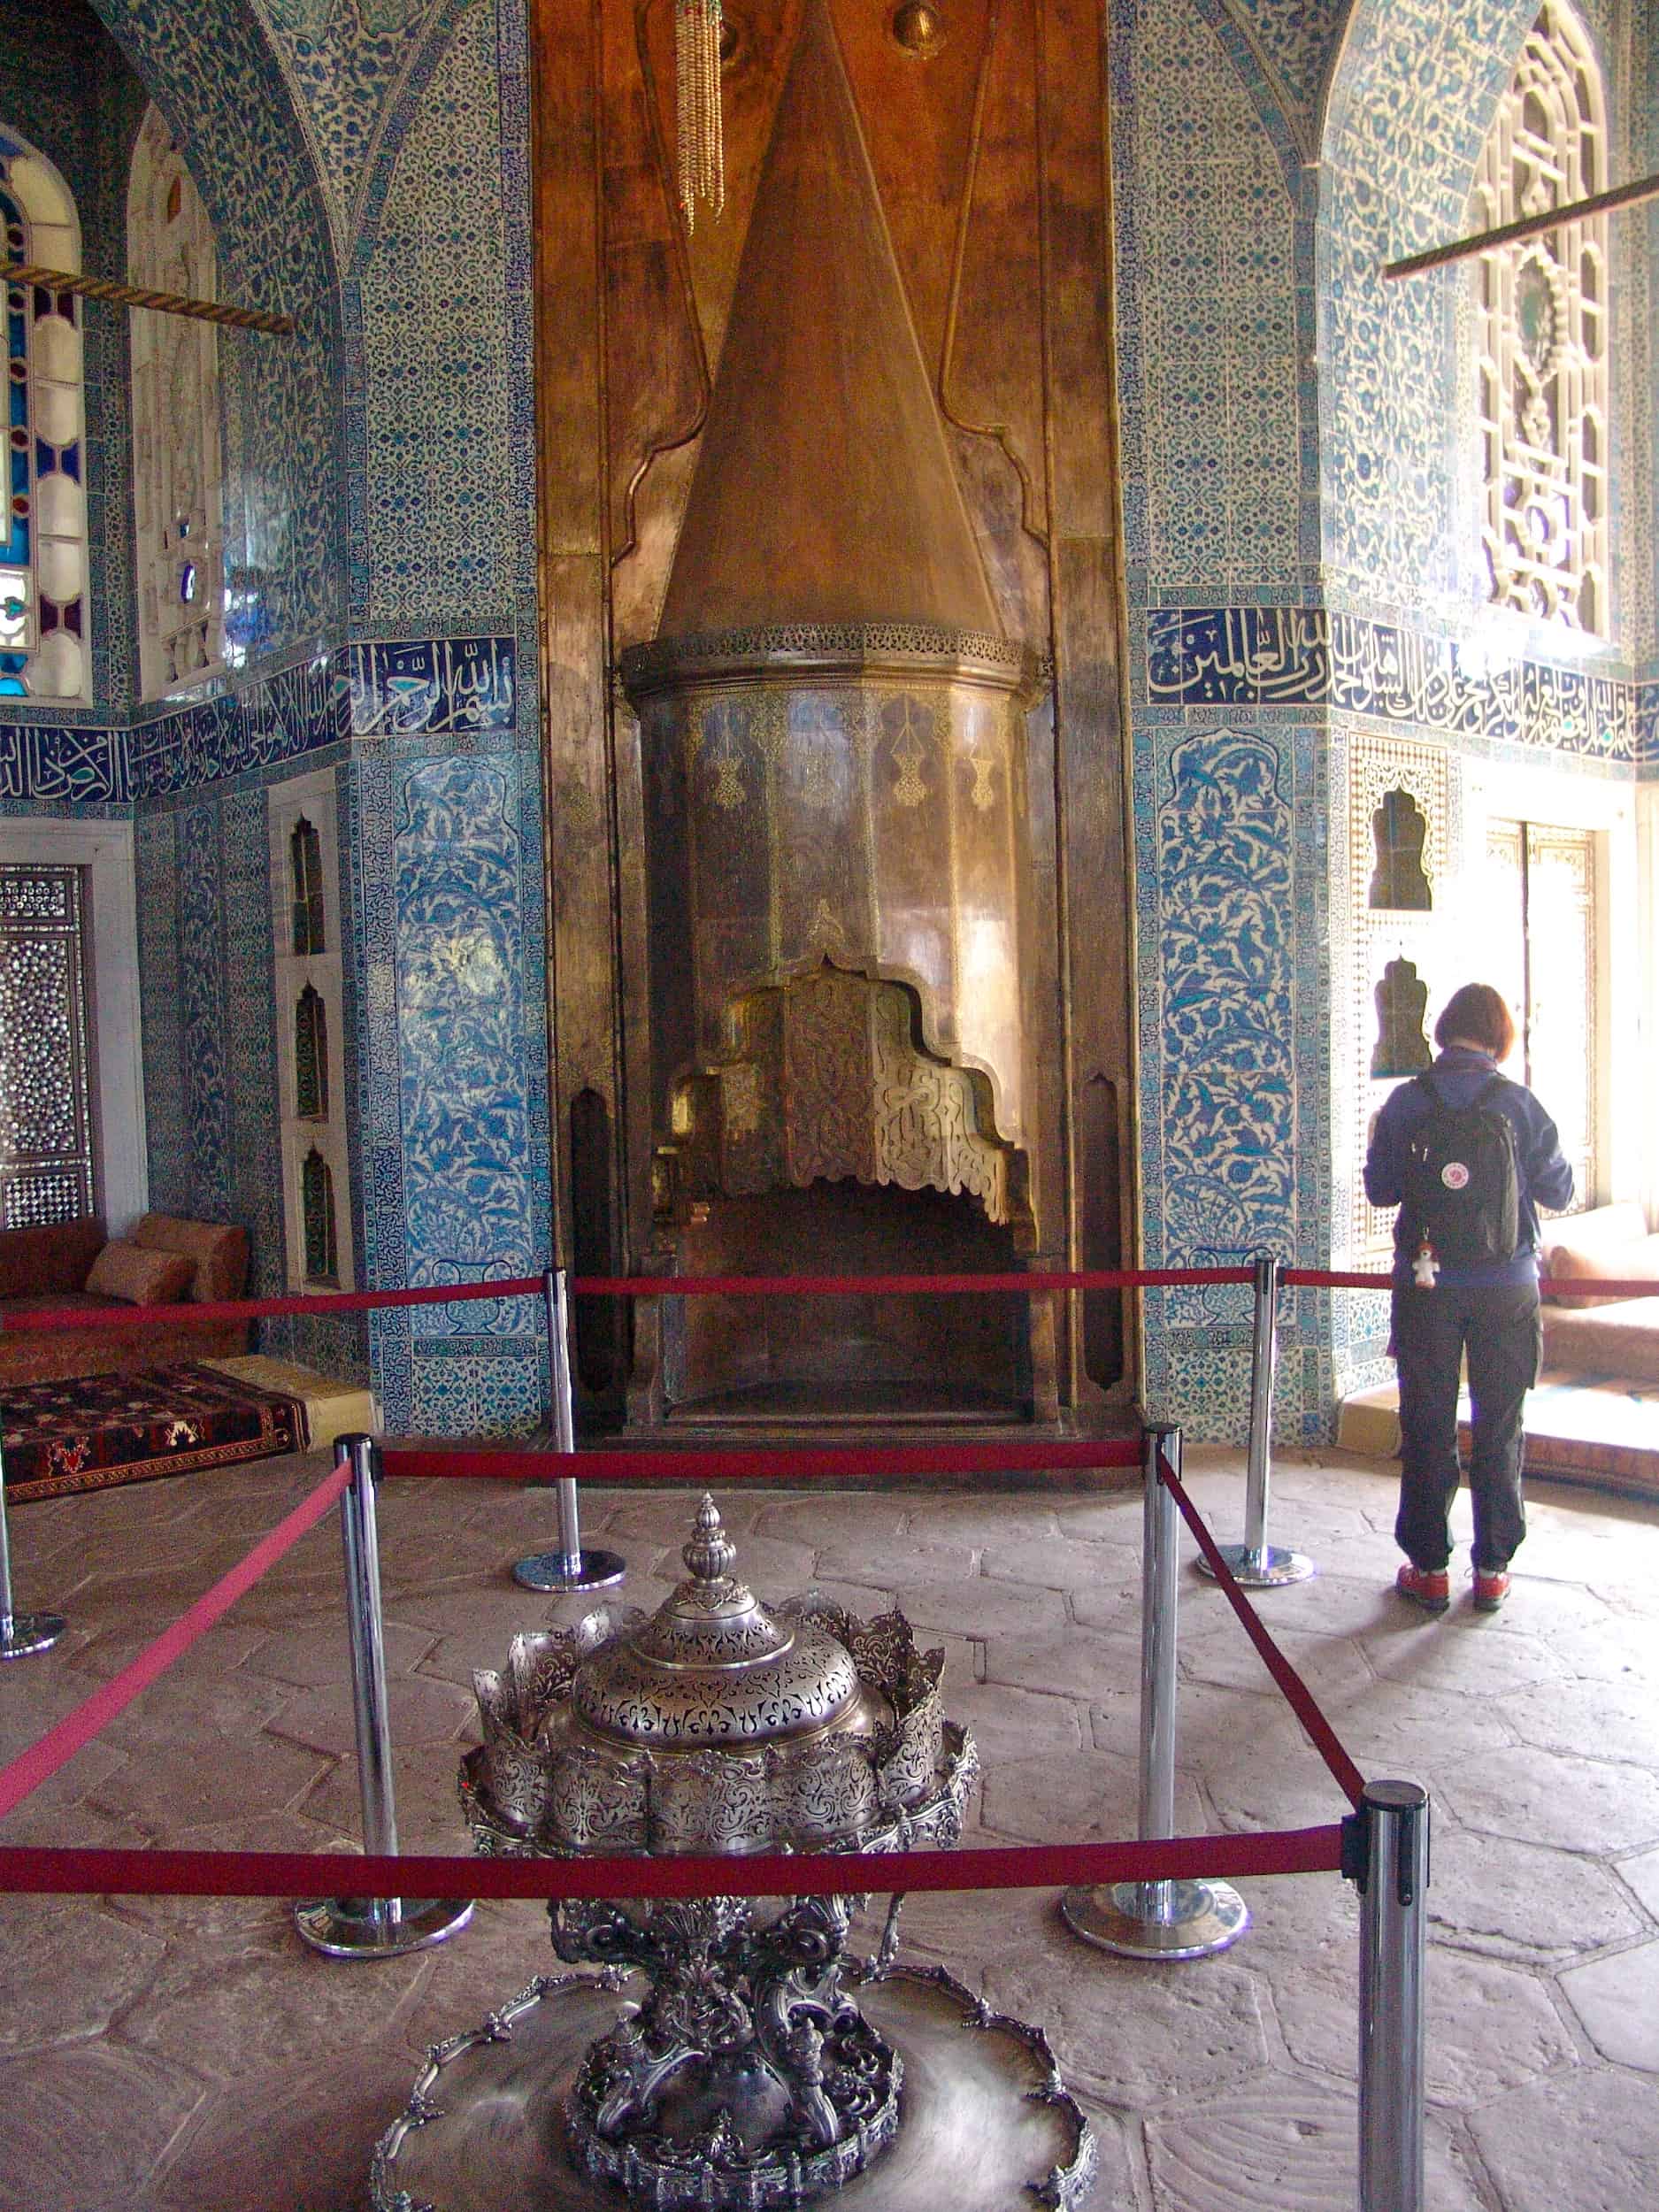 Fireplace in the Baghdad Pavilion